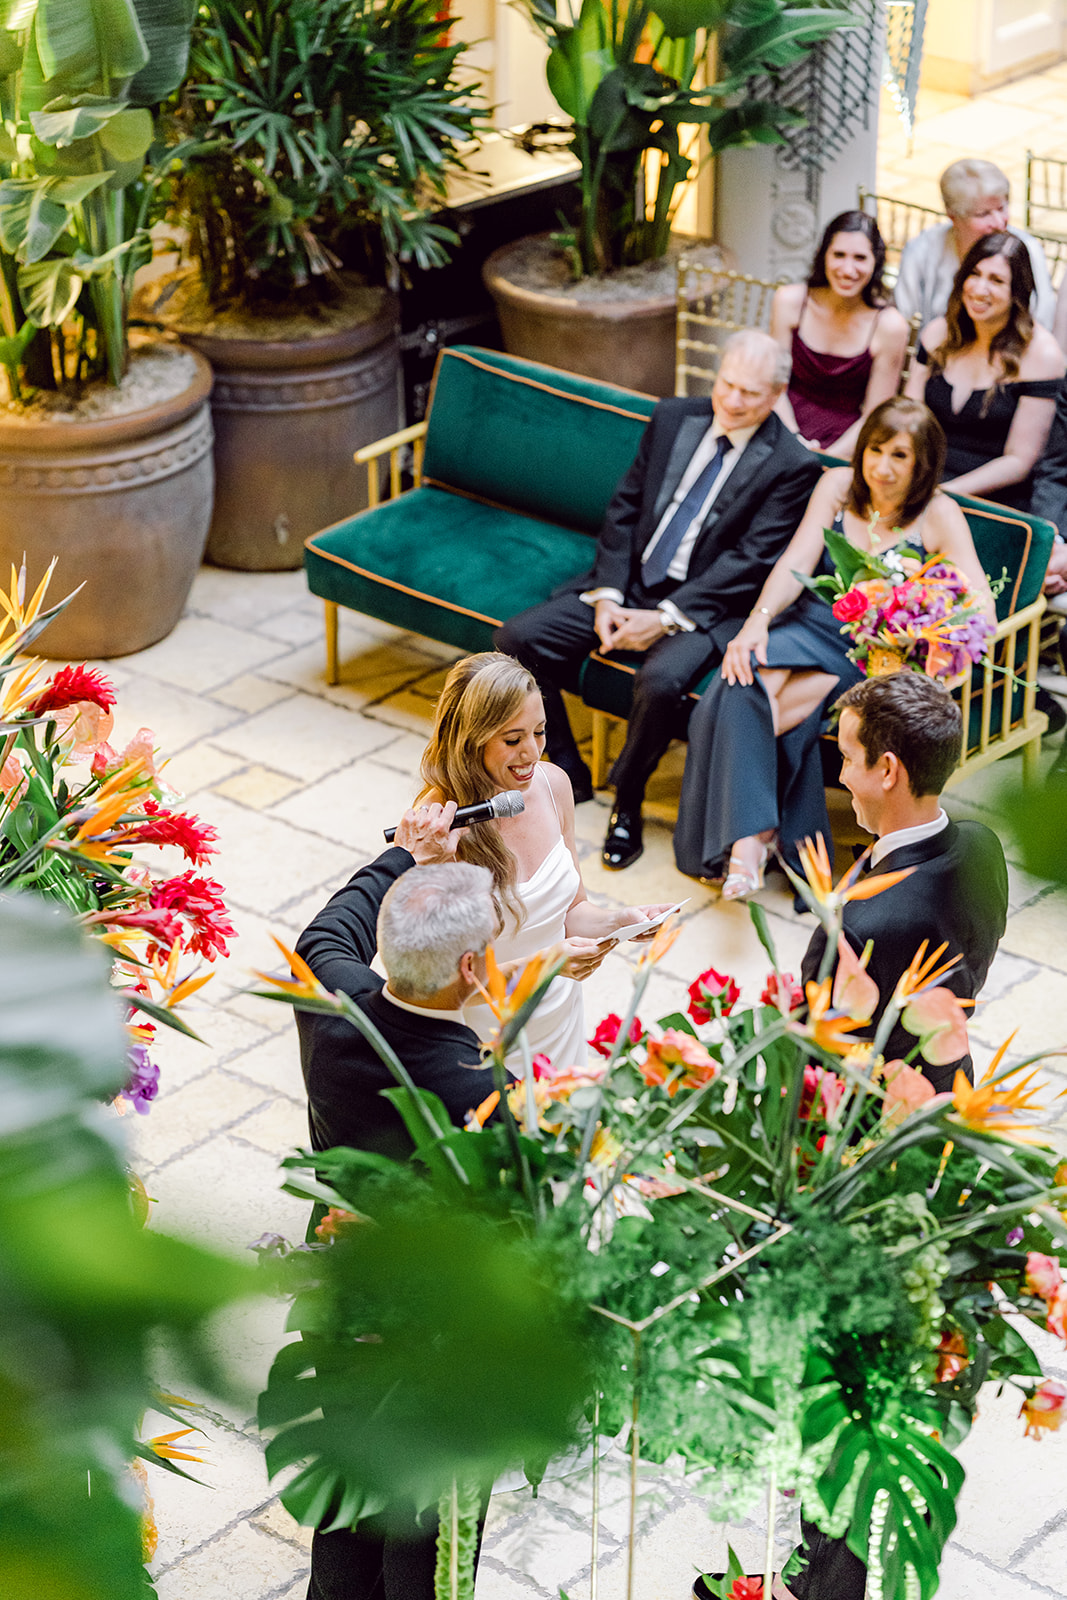 Looking down on bride reading vows to groom during ceremony at Mayfair House Hotel & Garden in Miami on wedding day.